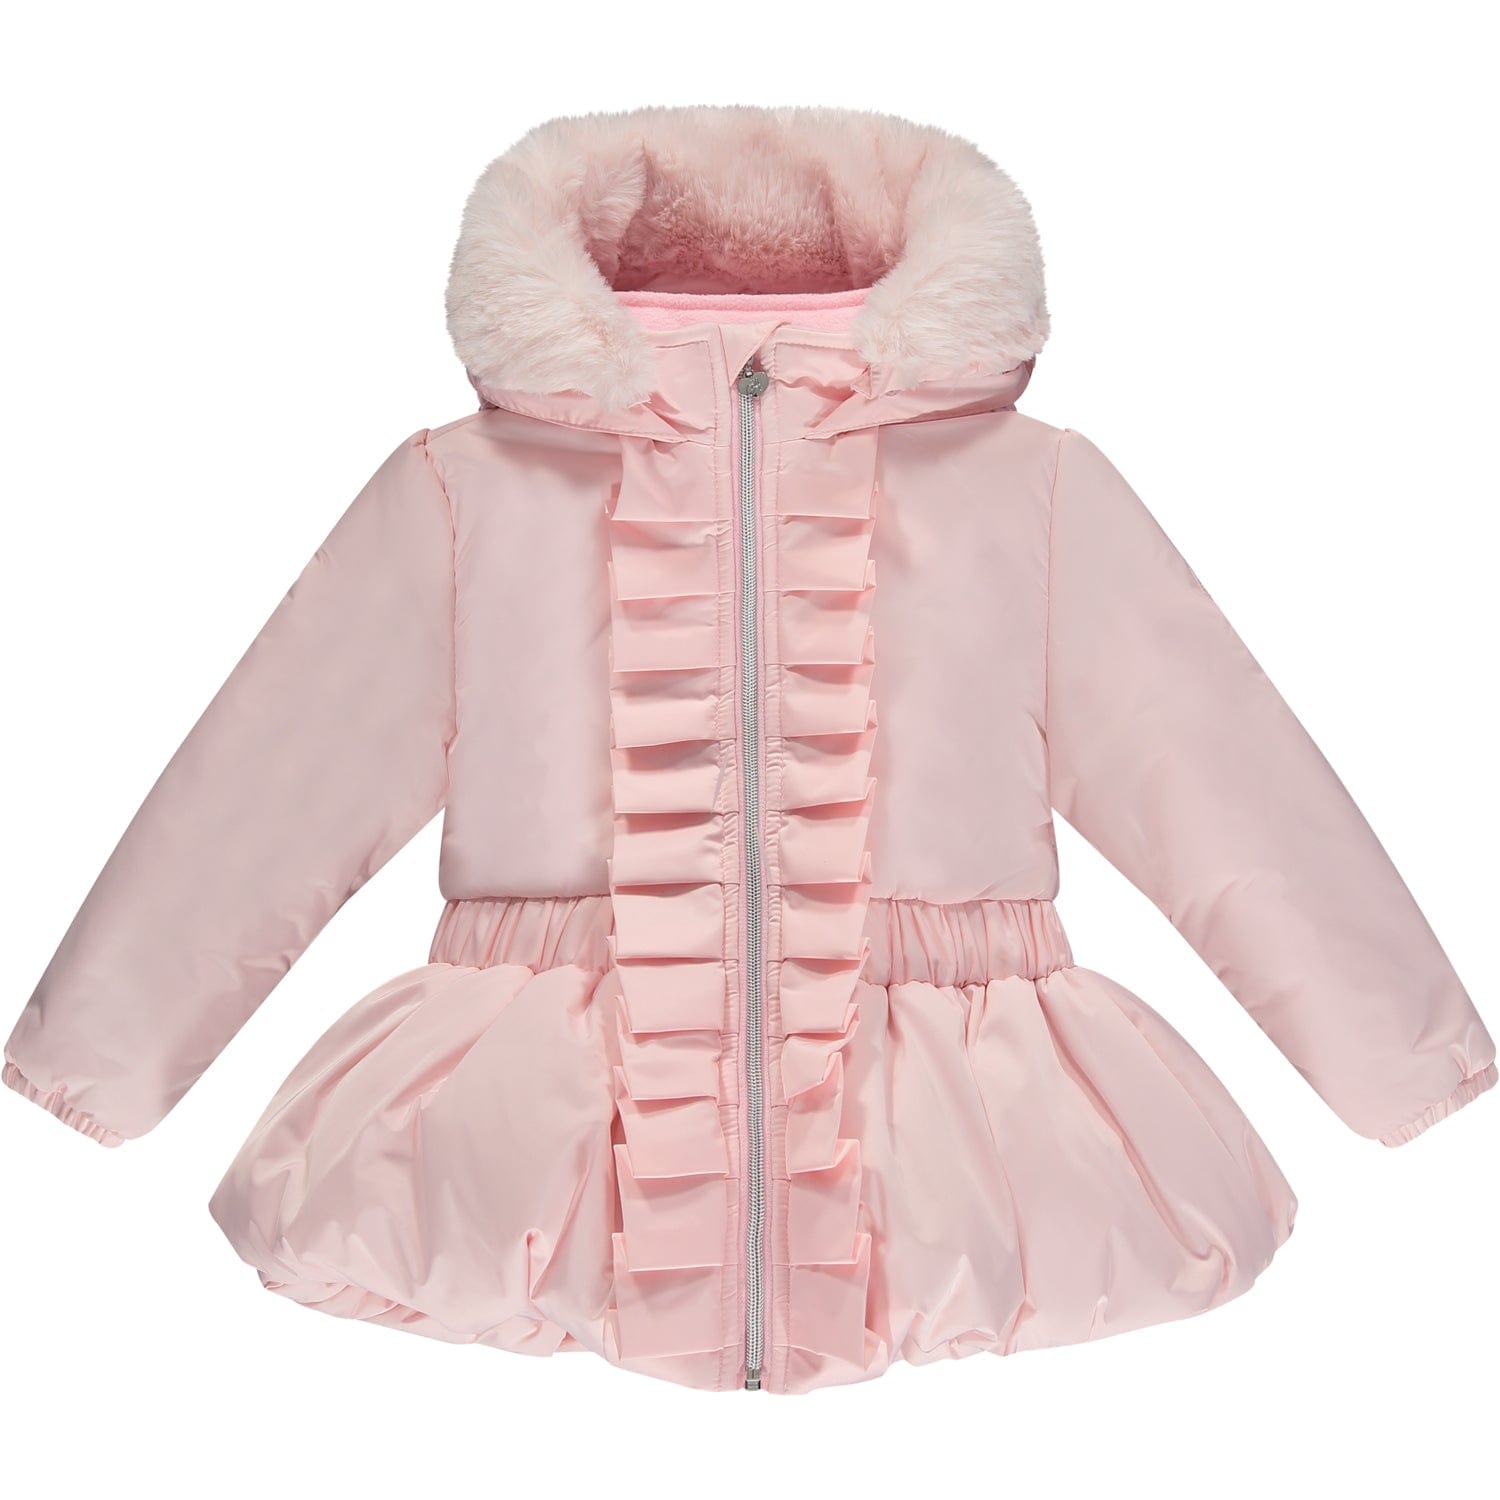 A DEE - Thea Front Frill Short Jacket - Pale Pink